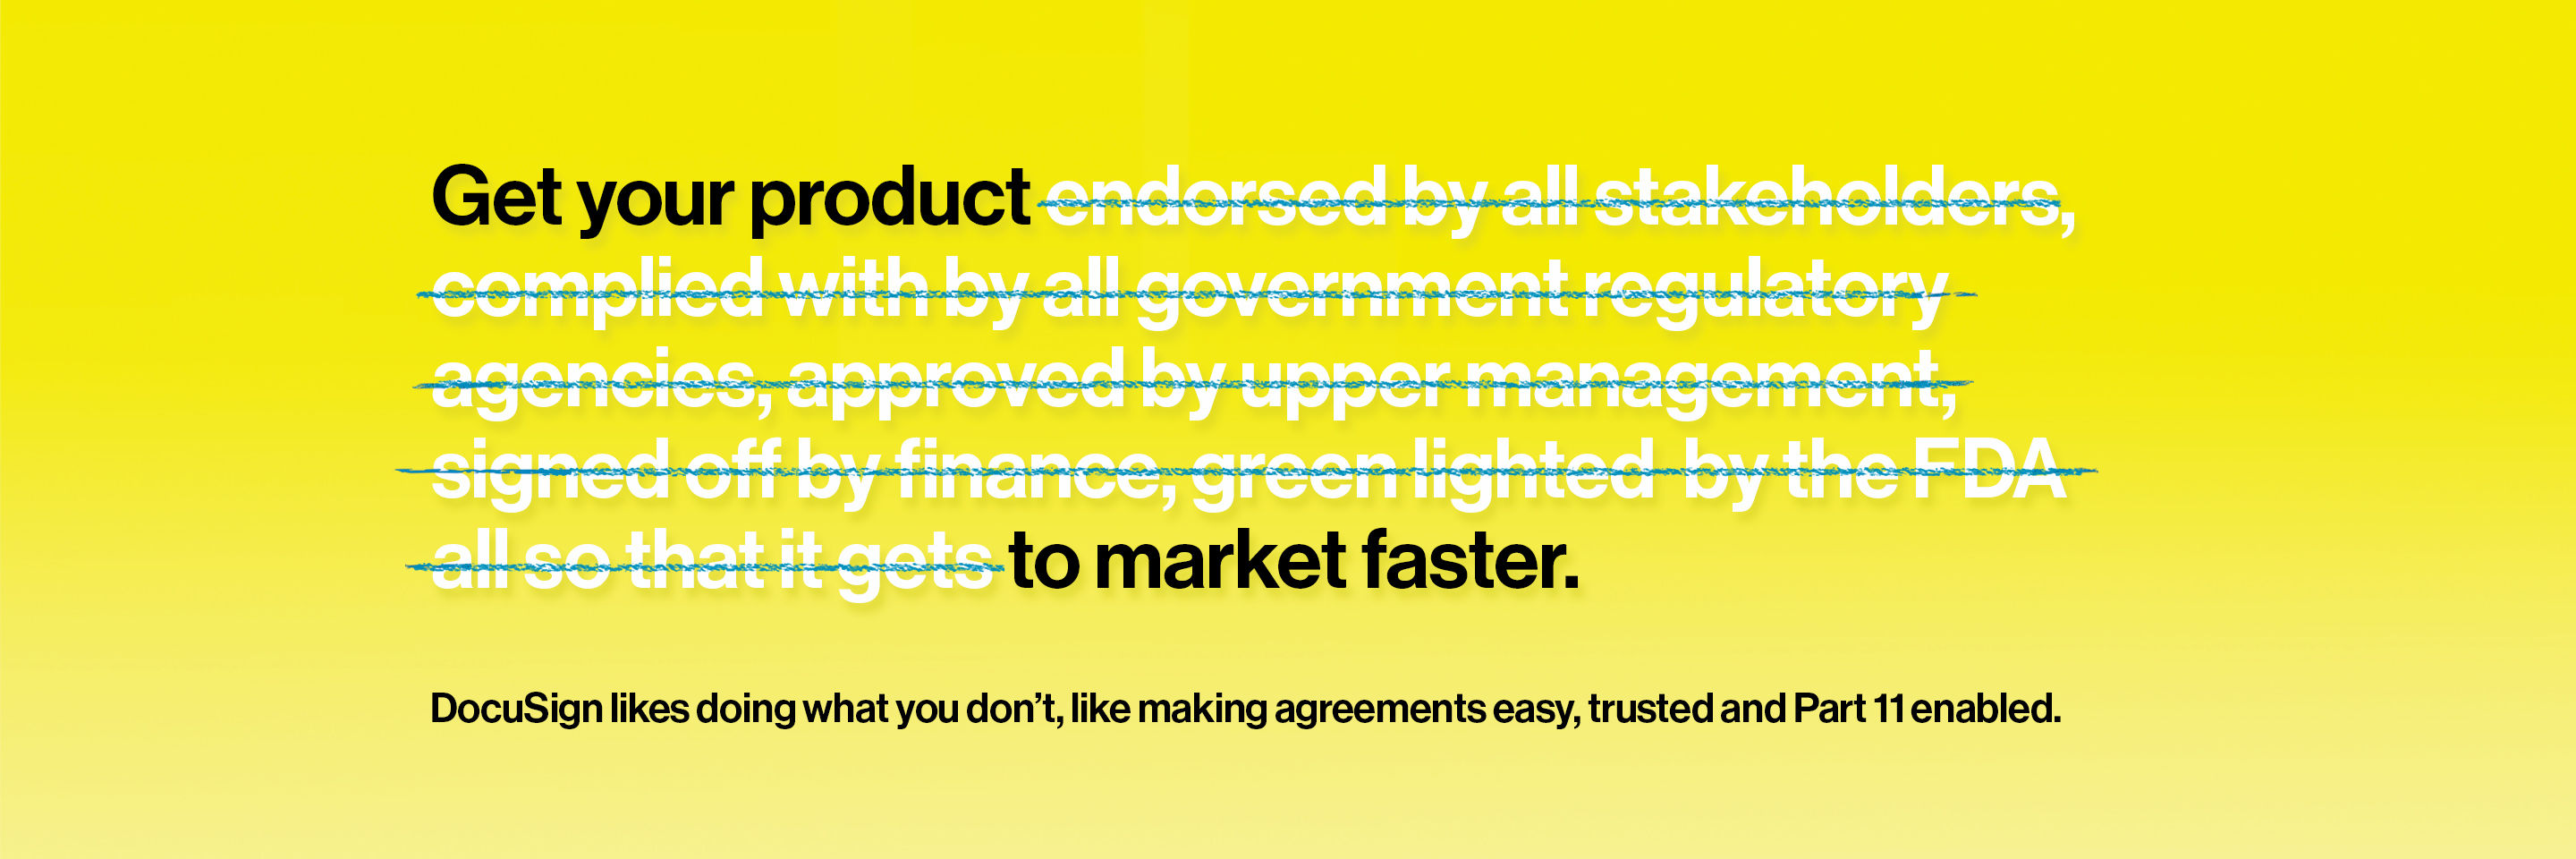 Get your product to market faster. DocuSign likes doing what you don't, like making agreements easy, trusted and Part 11 enabled.